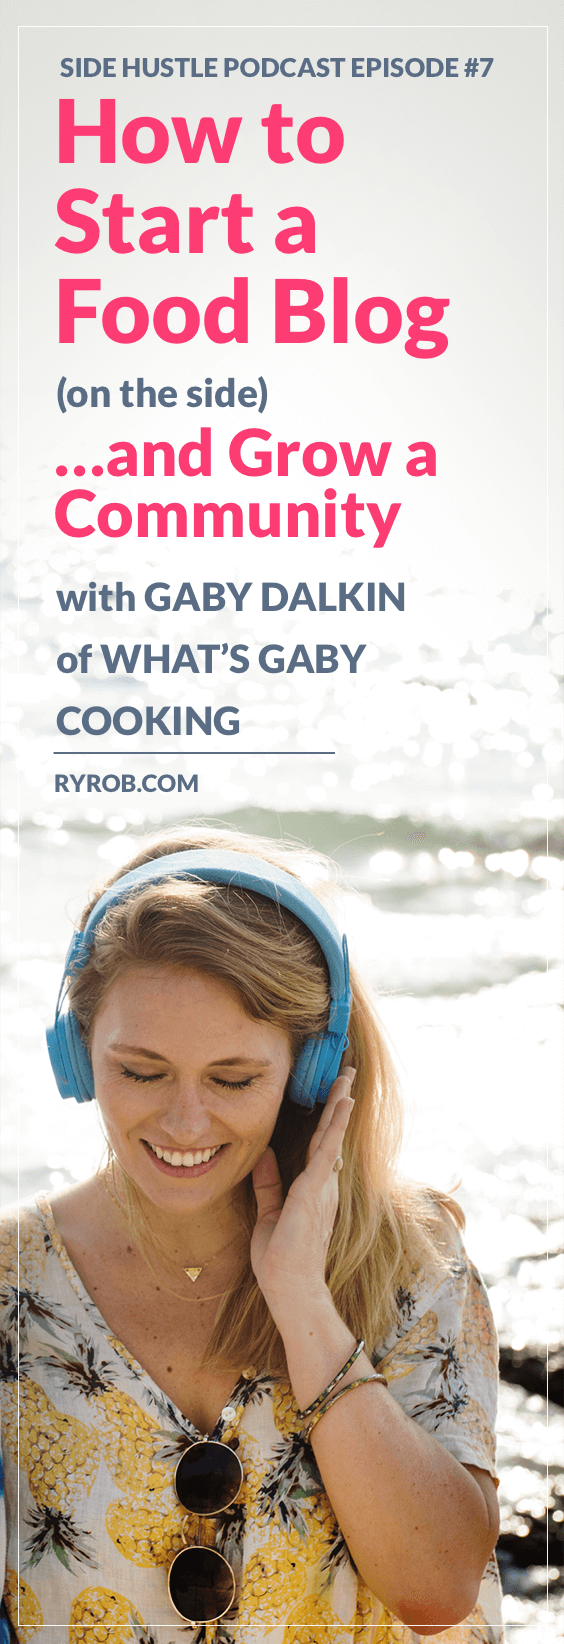 In this episode, we’re about how to start a food blog on the side (and much more) with Gaby Dalkin, the food blogger behind What’s Gaby Cooking.